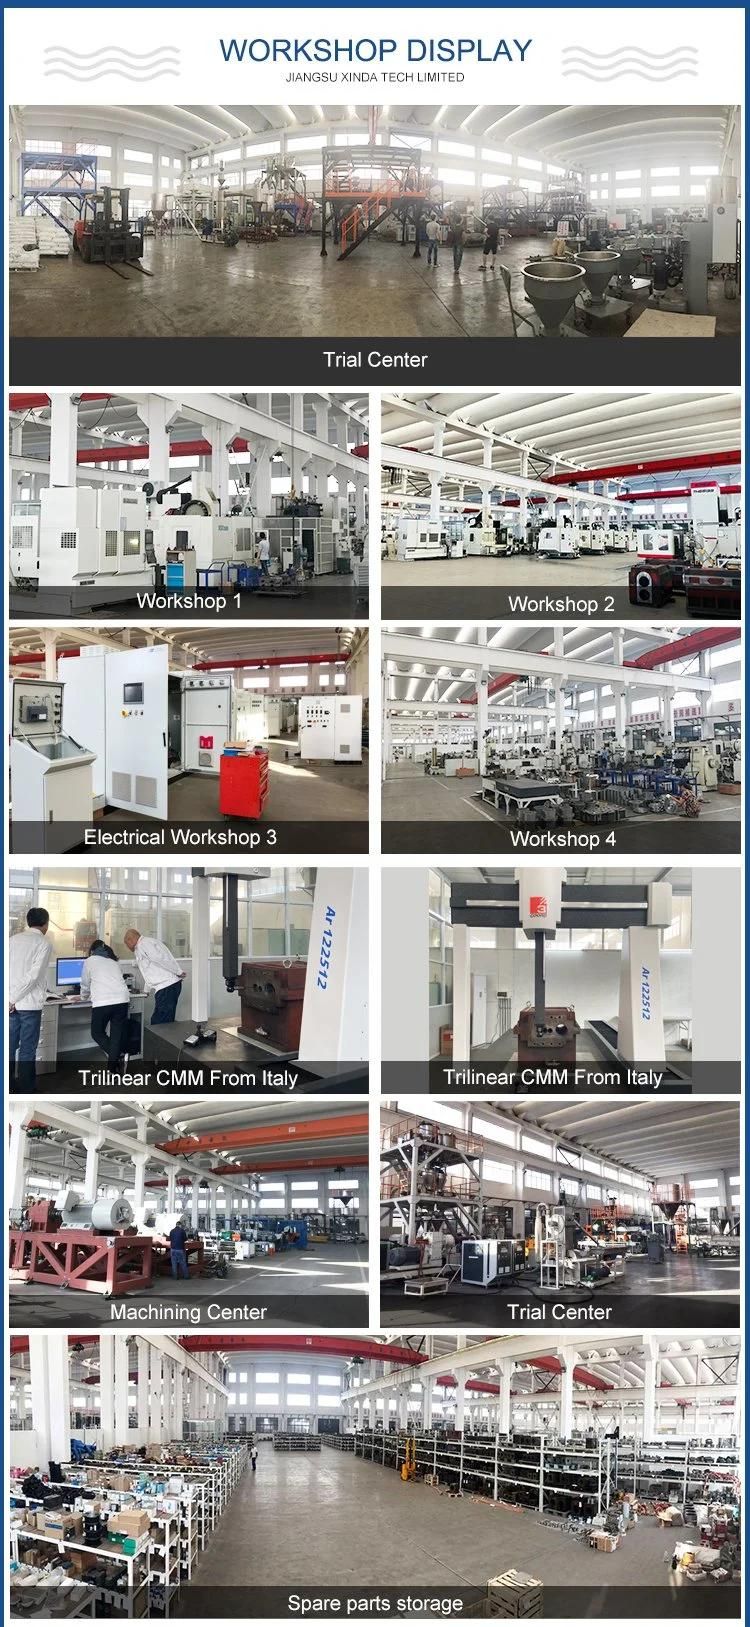 Food Twin Screw Extruder with 3 Zone Grain Product Making Machines